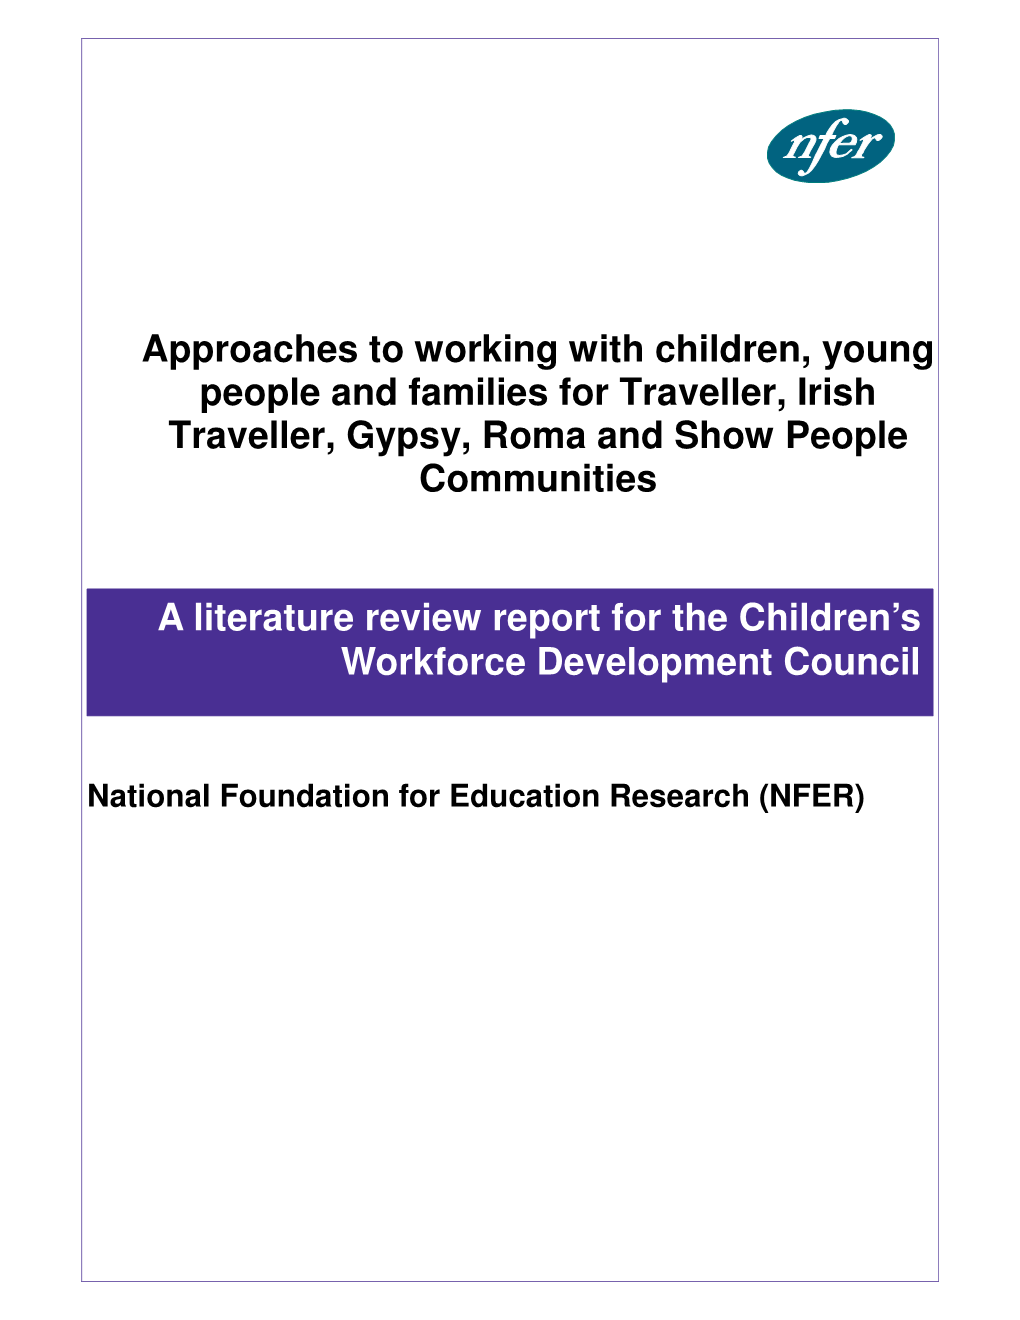 Approaches to Working with Children, Young People and Families for Traveller, Irish Traveller, Gypsy, Roma and Show People Communities